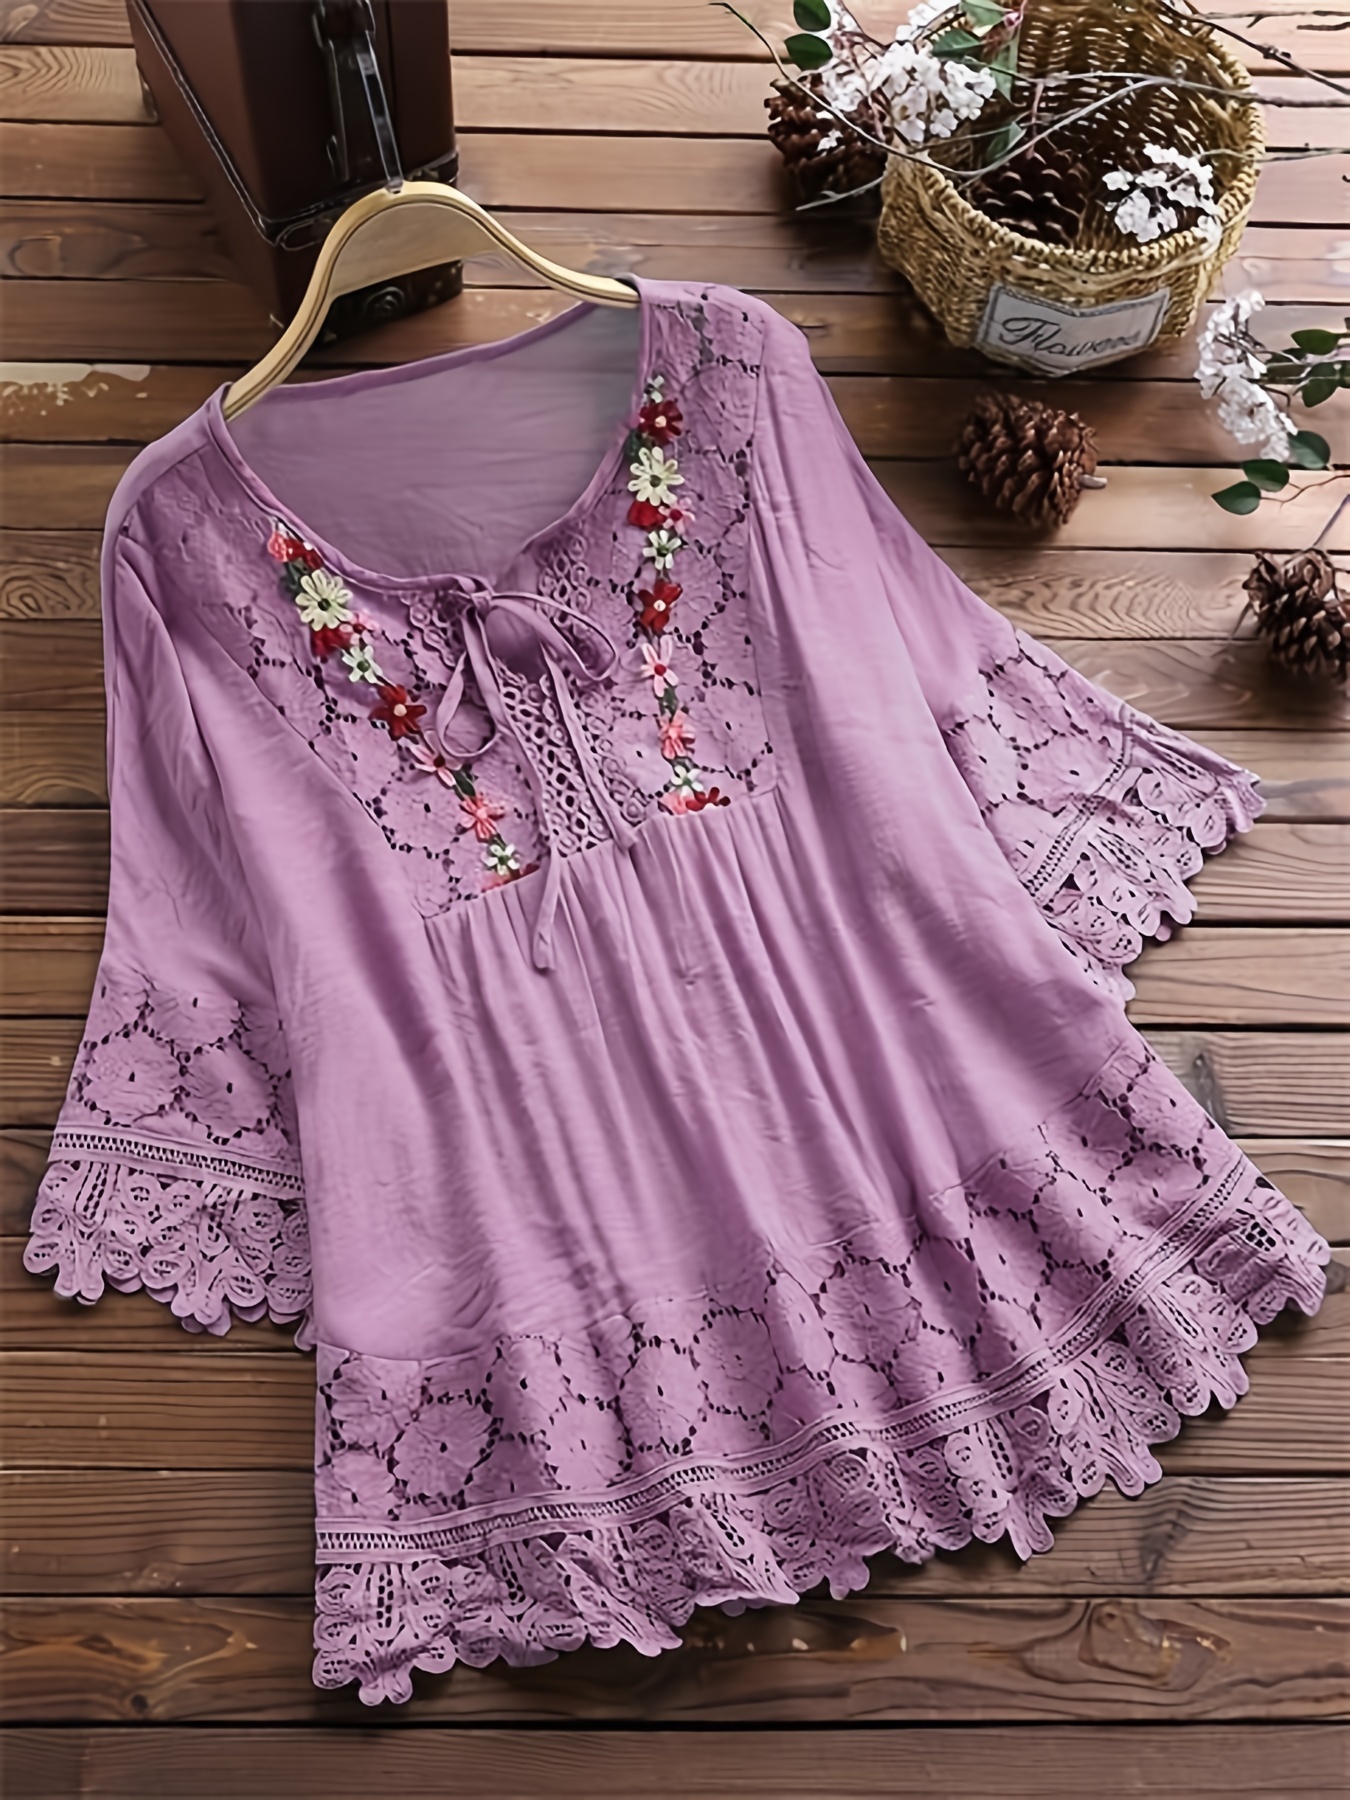 Lilac Lace Short Sleeve Top